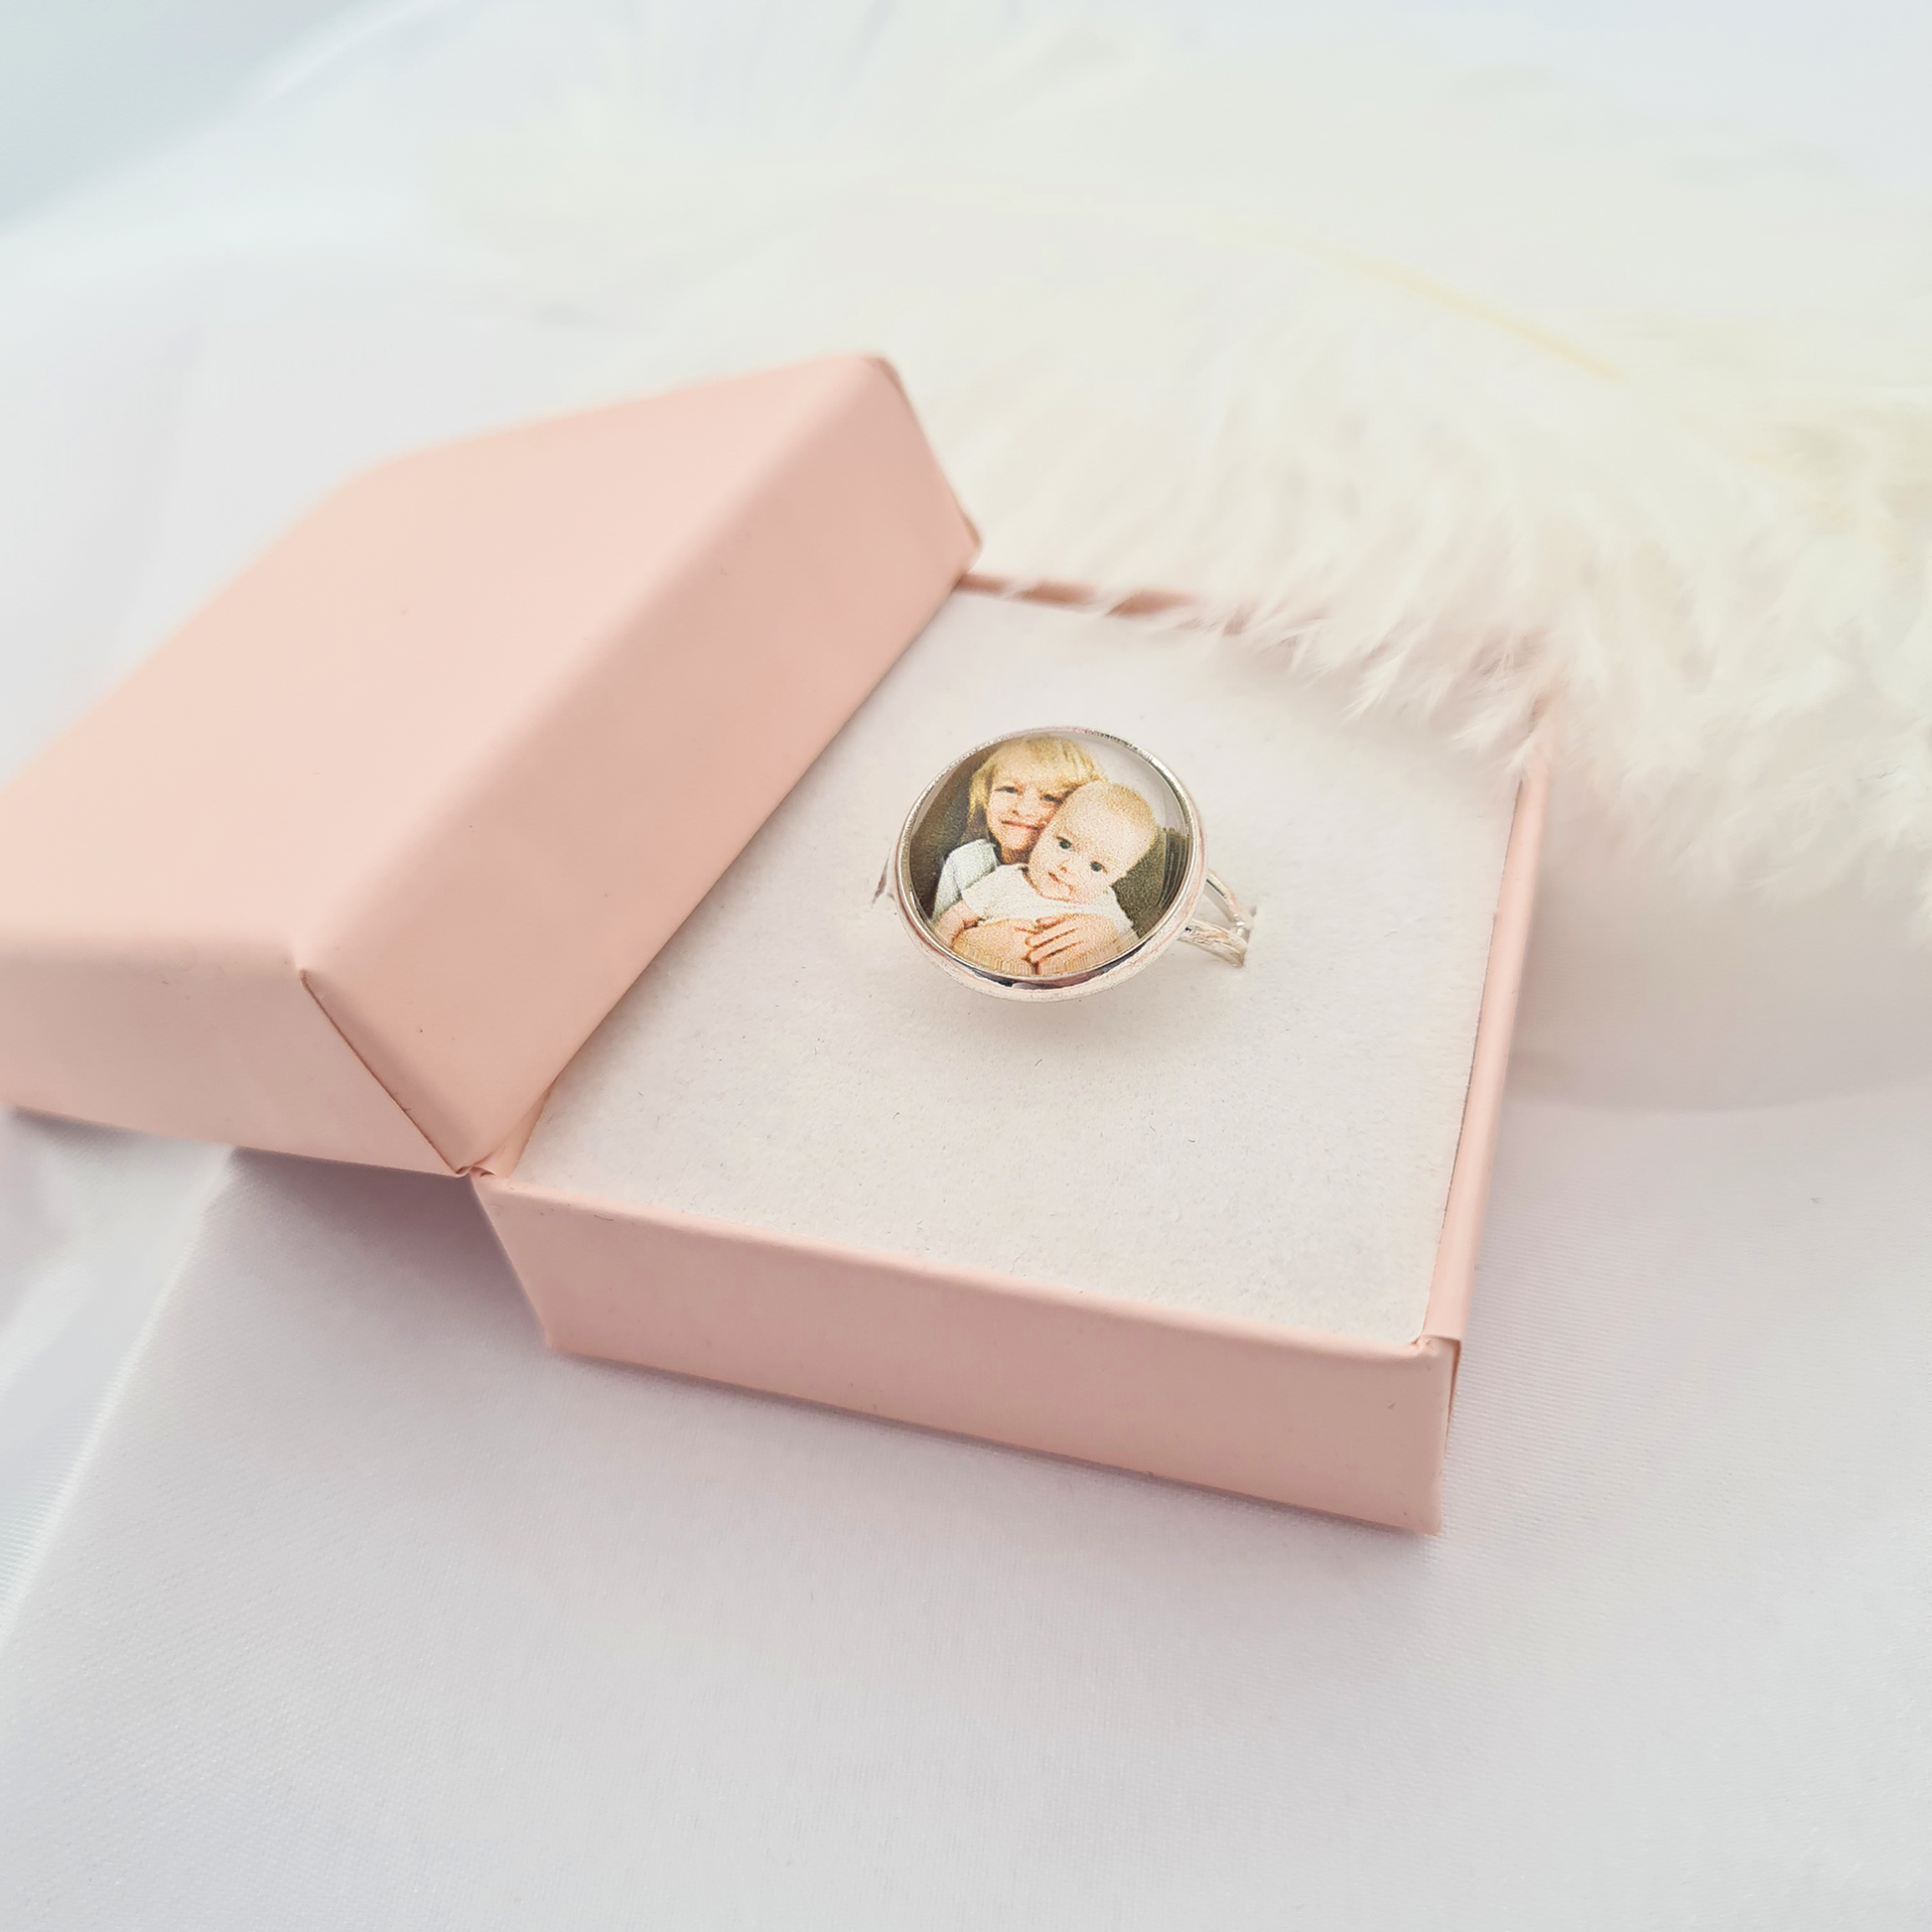 Silver ring personalised with a photo set in glass inside a pink box